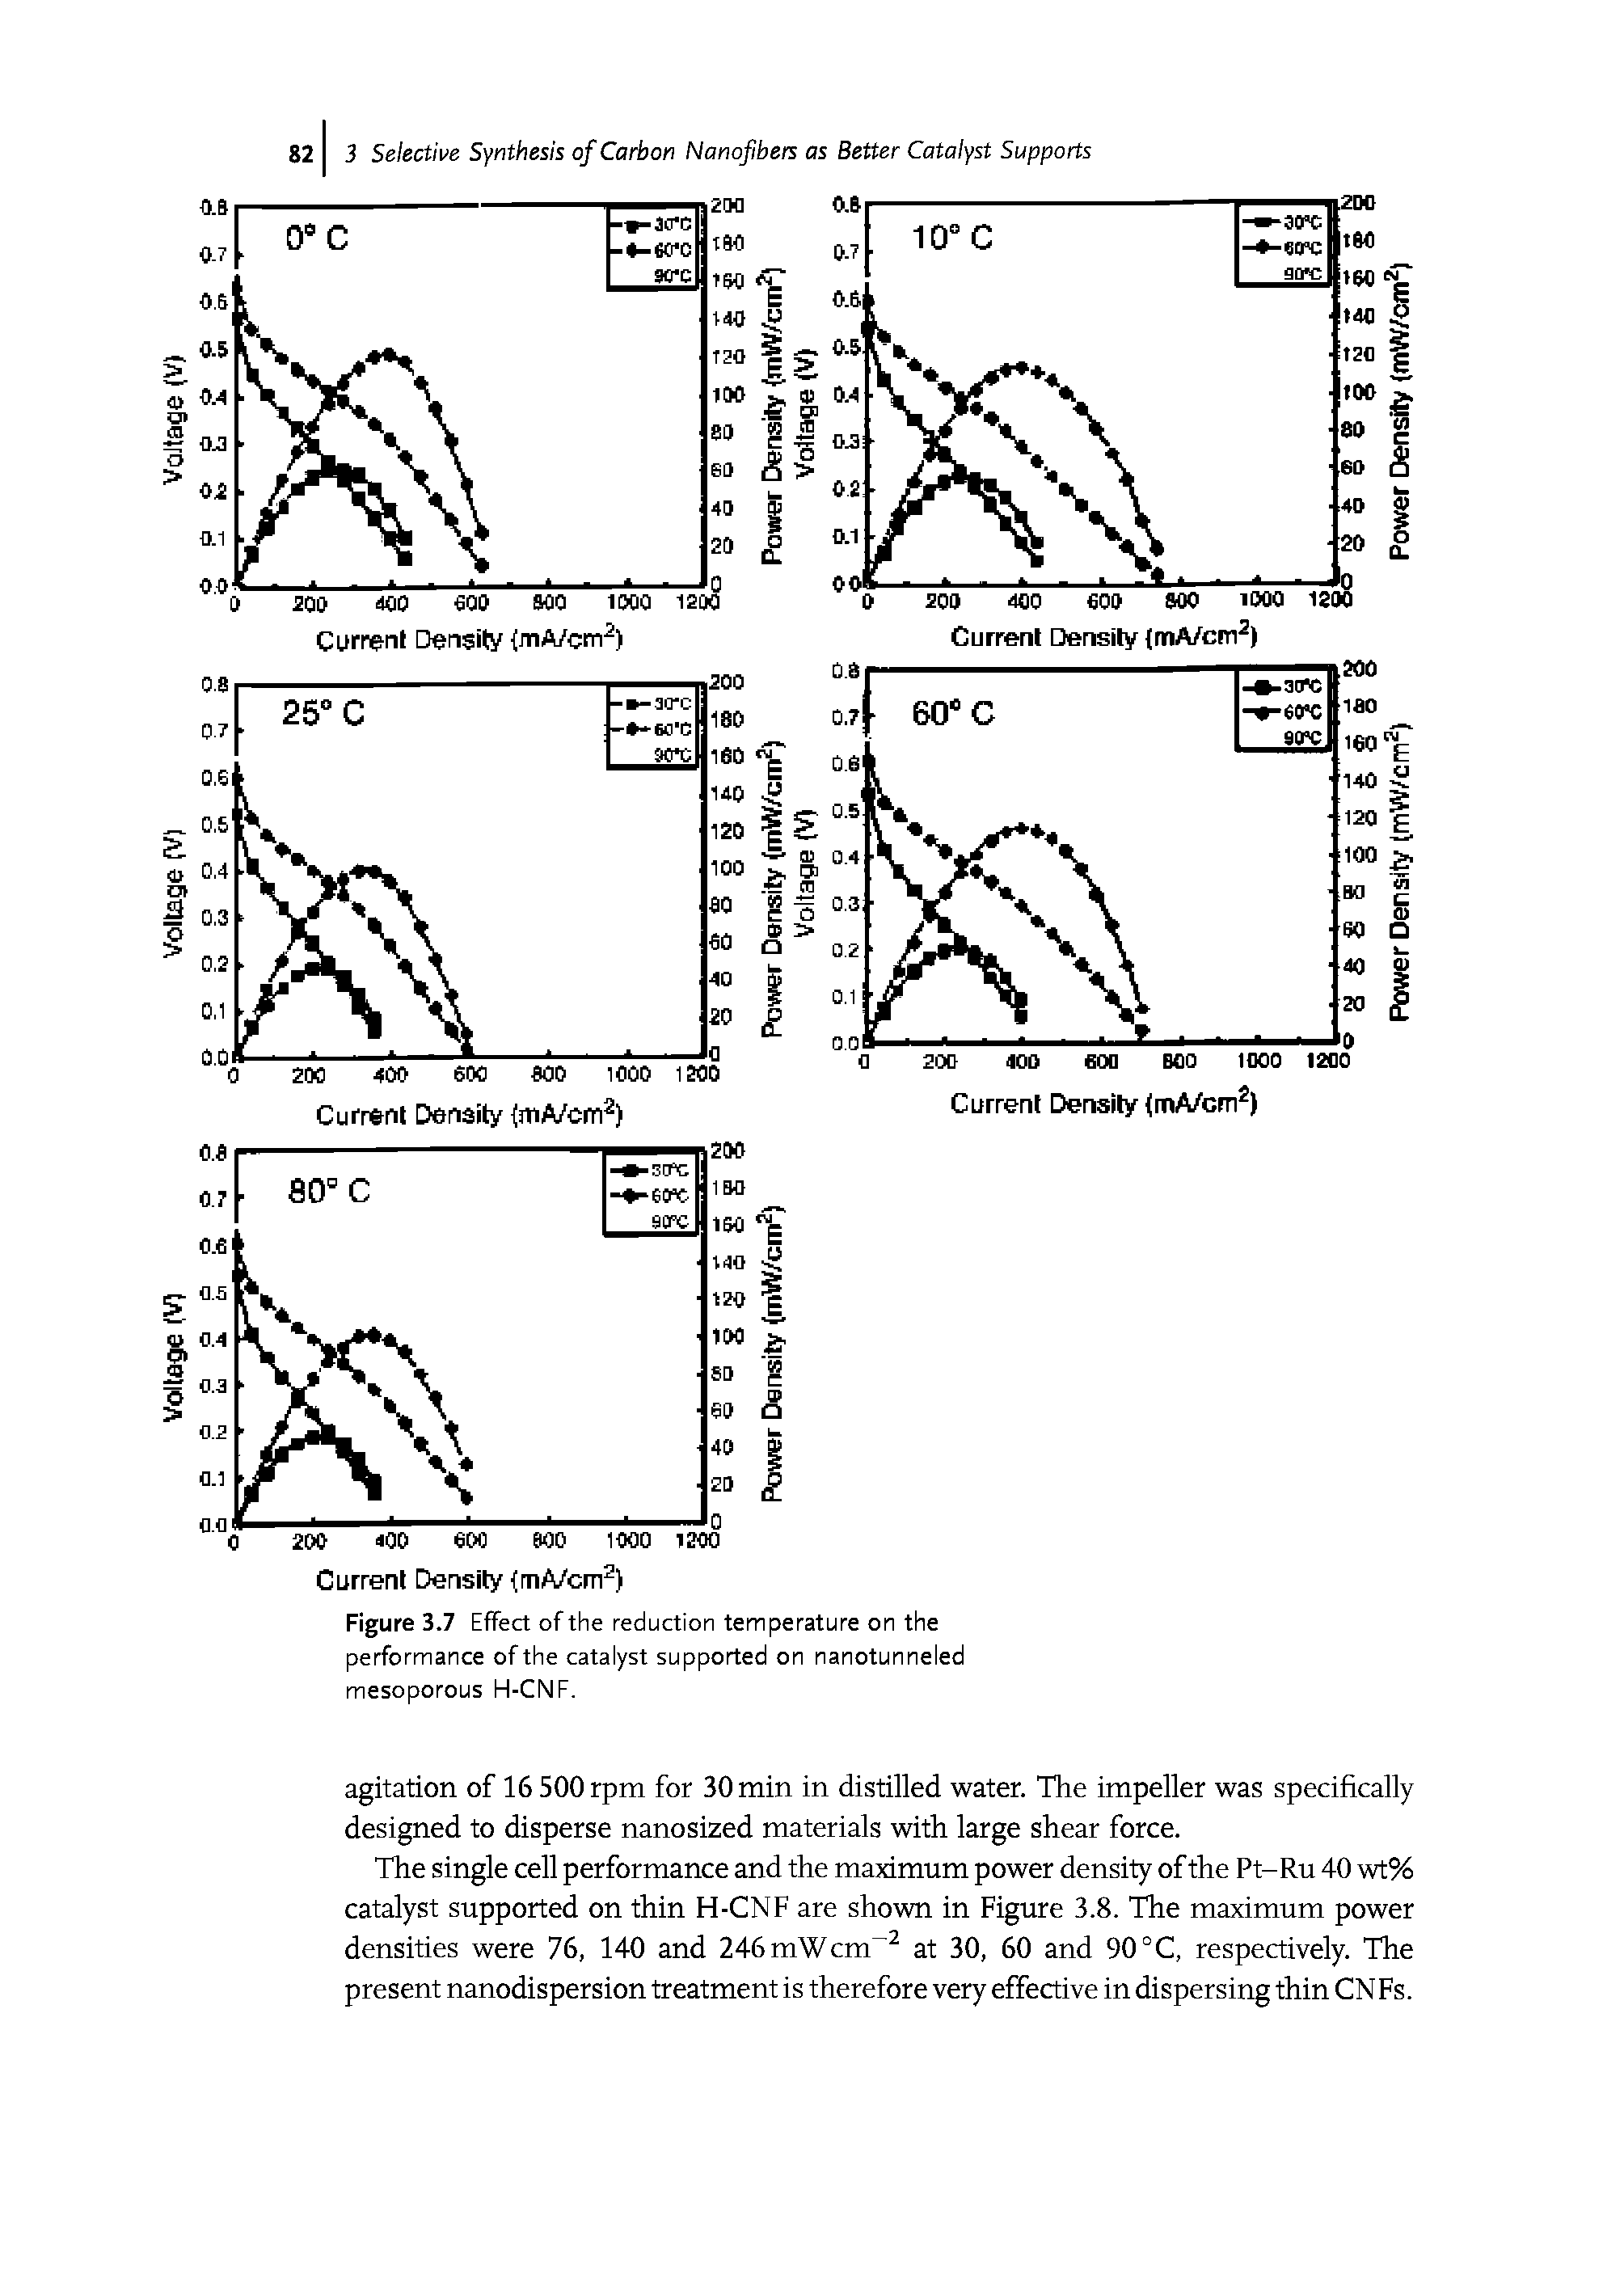 Figure 3.7 Effect of the reduction temperature on the performance of the catalyst supported on nanotunneled mesoporous H-CNF.